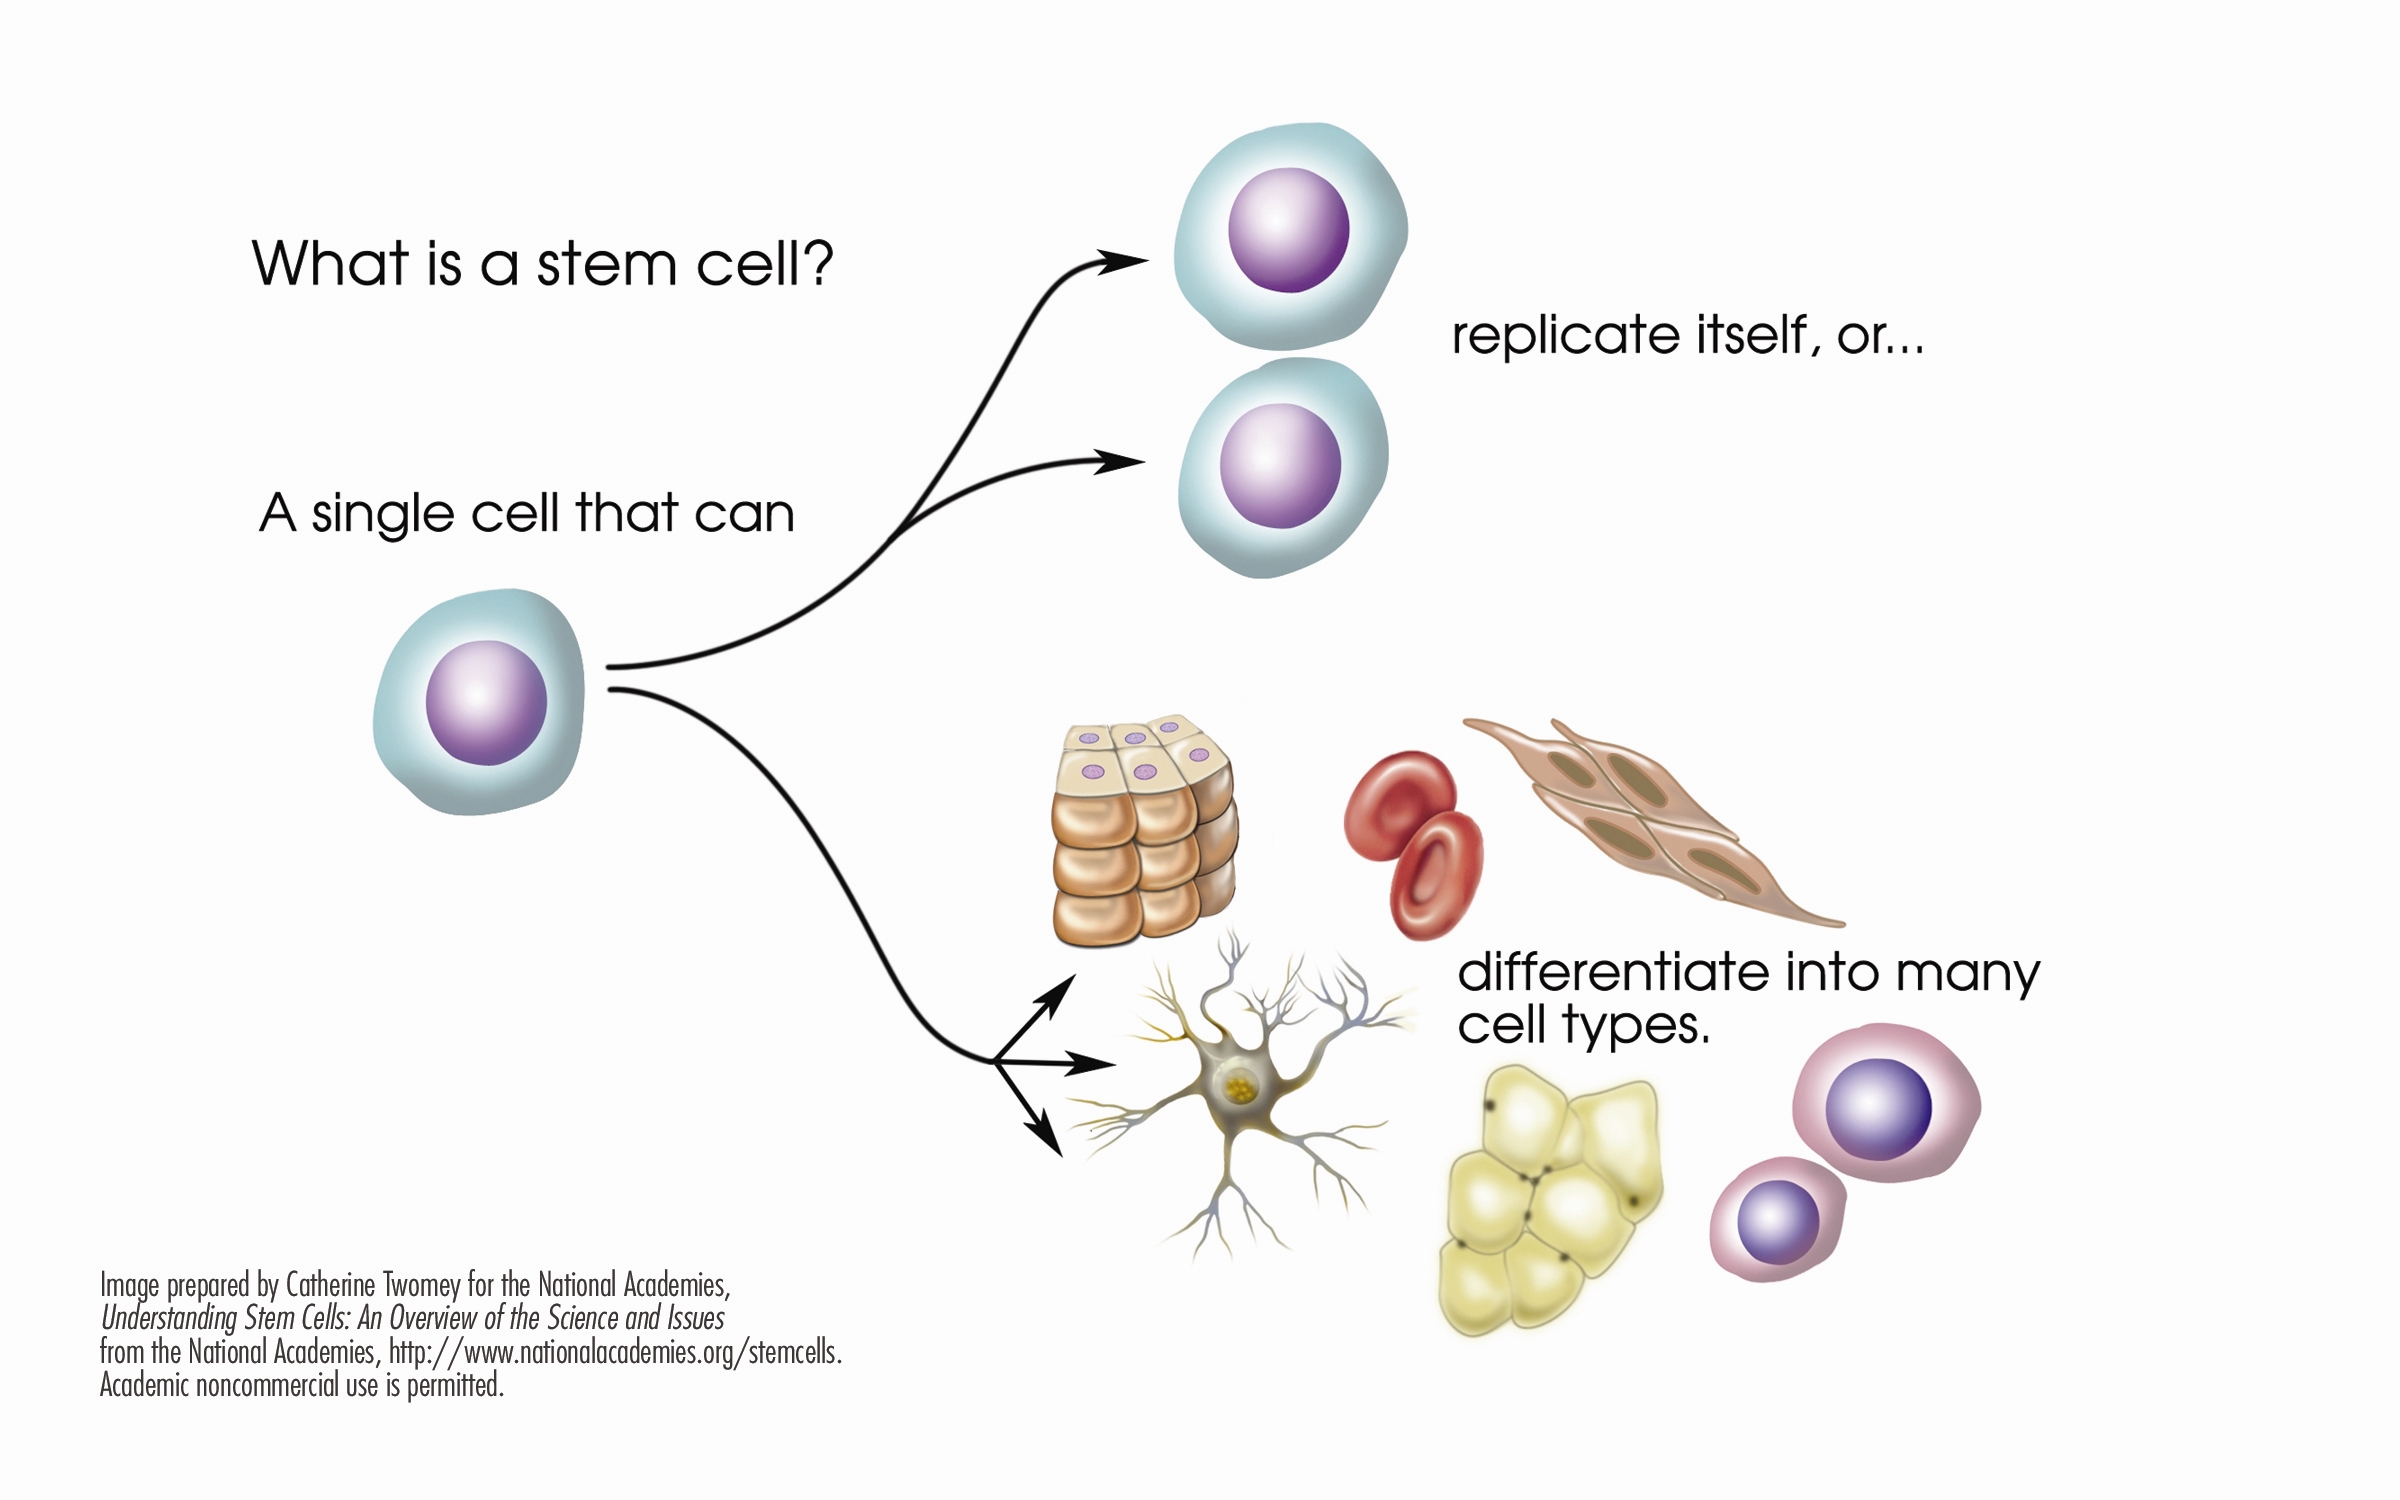 Stem cell diagram - a stem cell is a single cell that can replicate itself or differentiate into many cell types